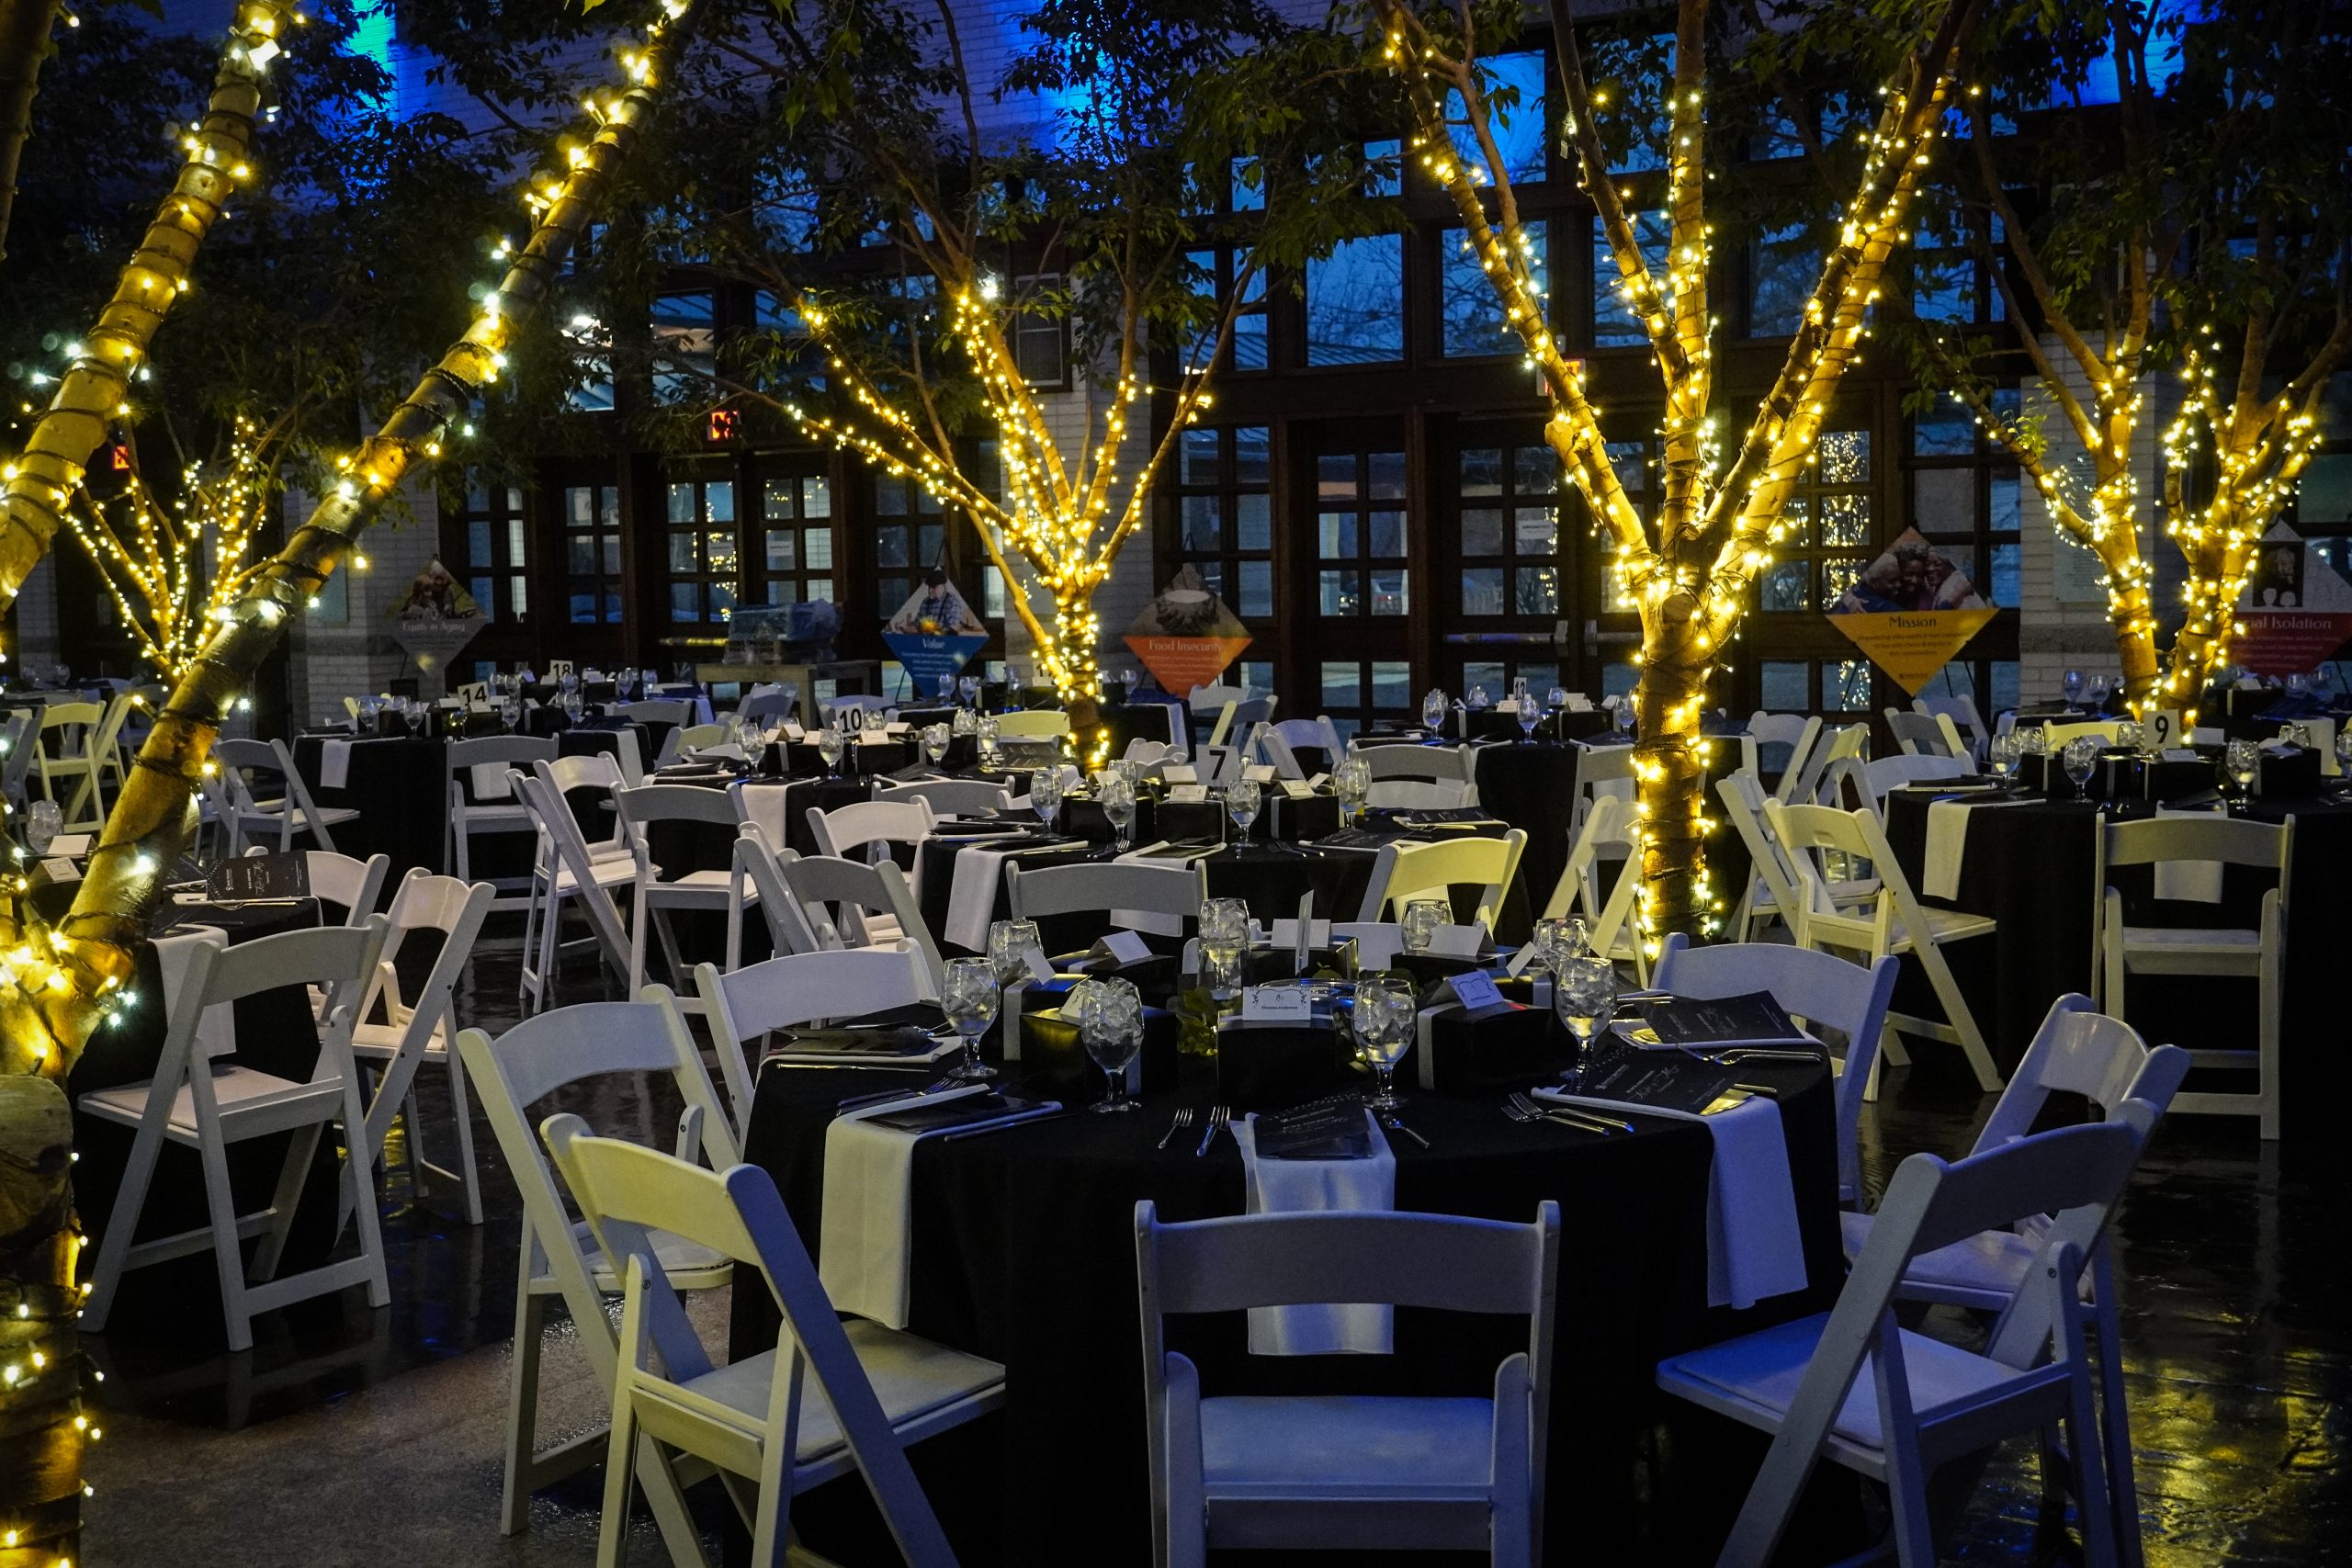 venue atrium decorated for gala with glowing trees, white chairs and black table cloths